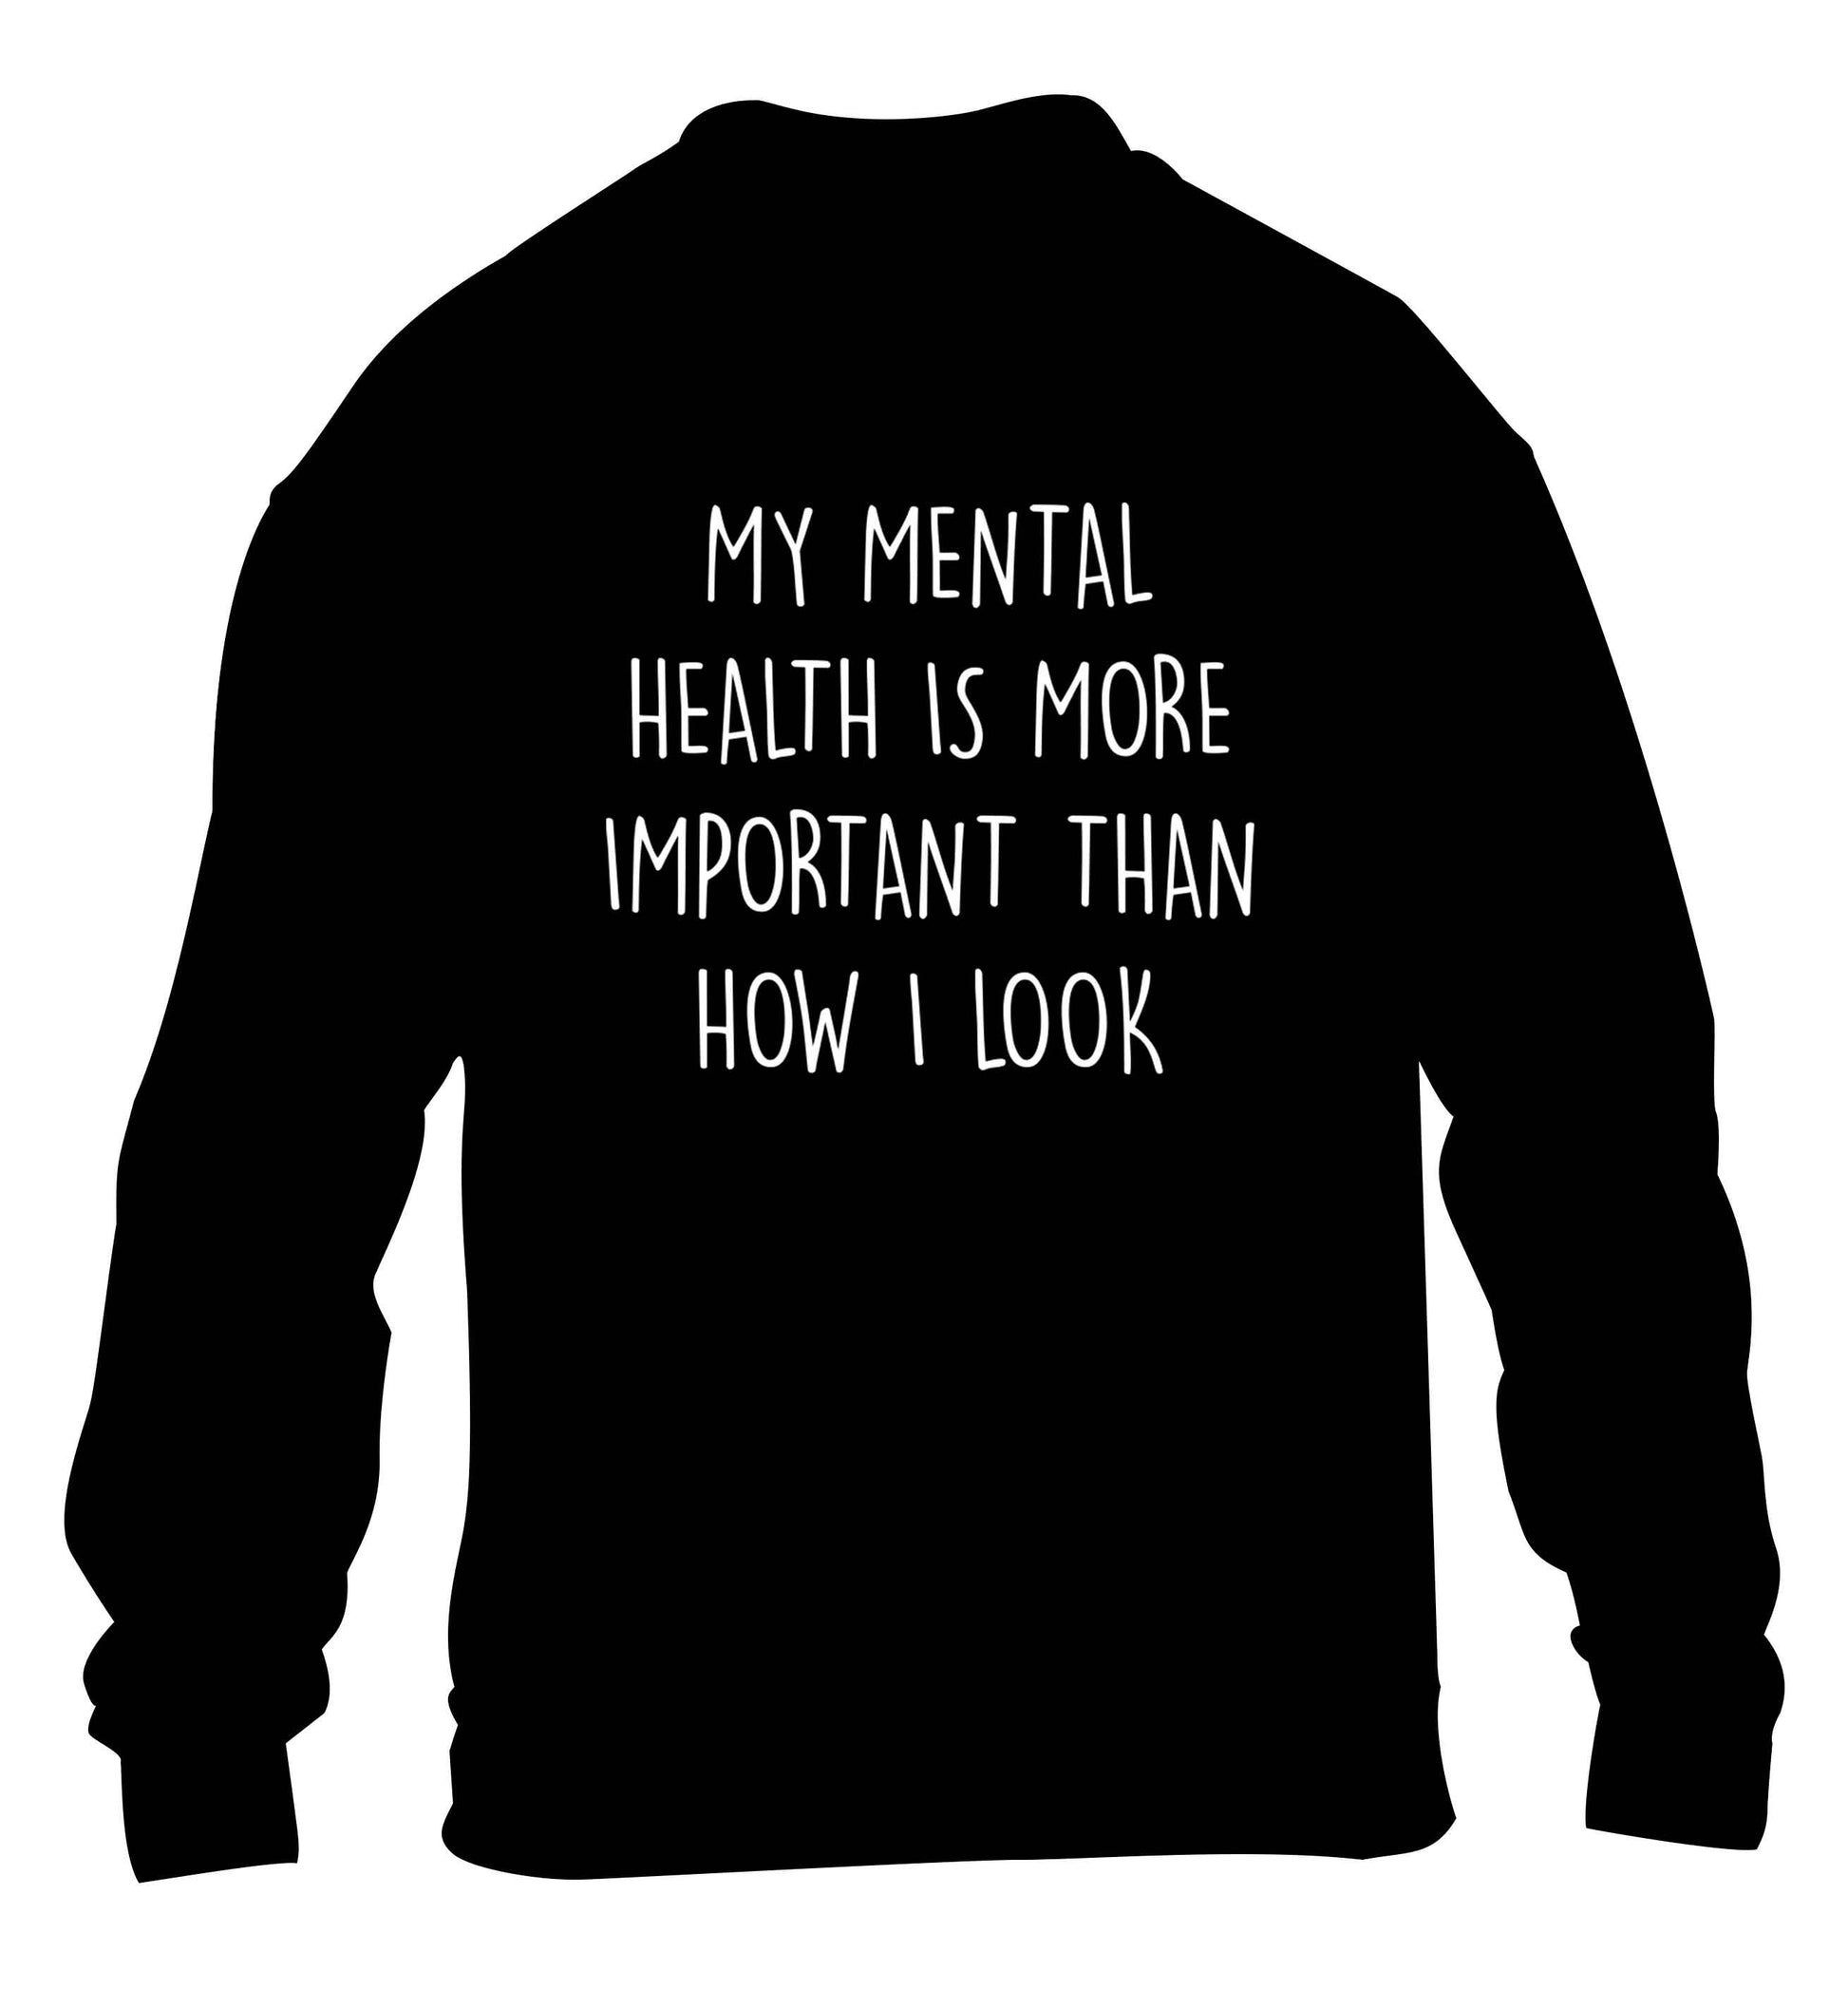 My mental health is more importnat than how I look children's black sweater 12-13 Years